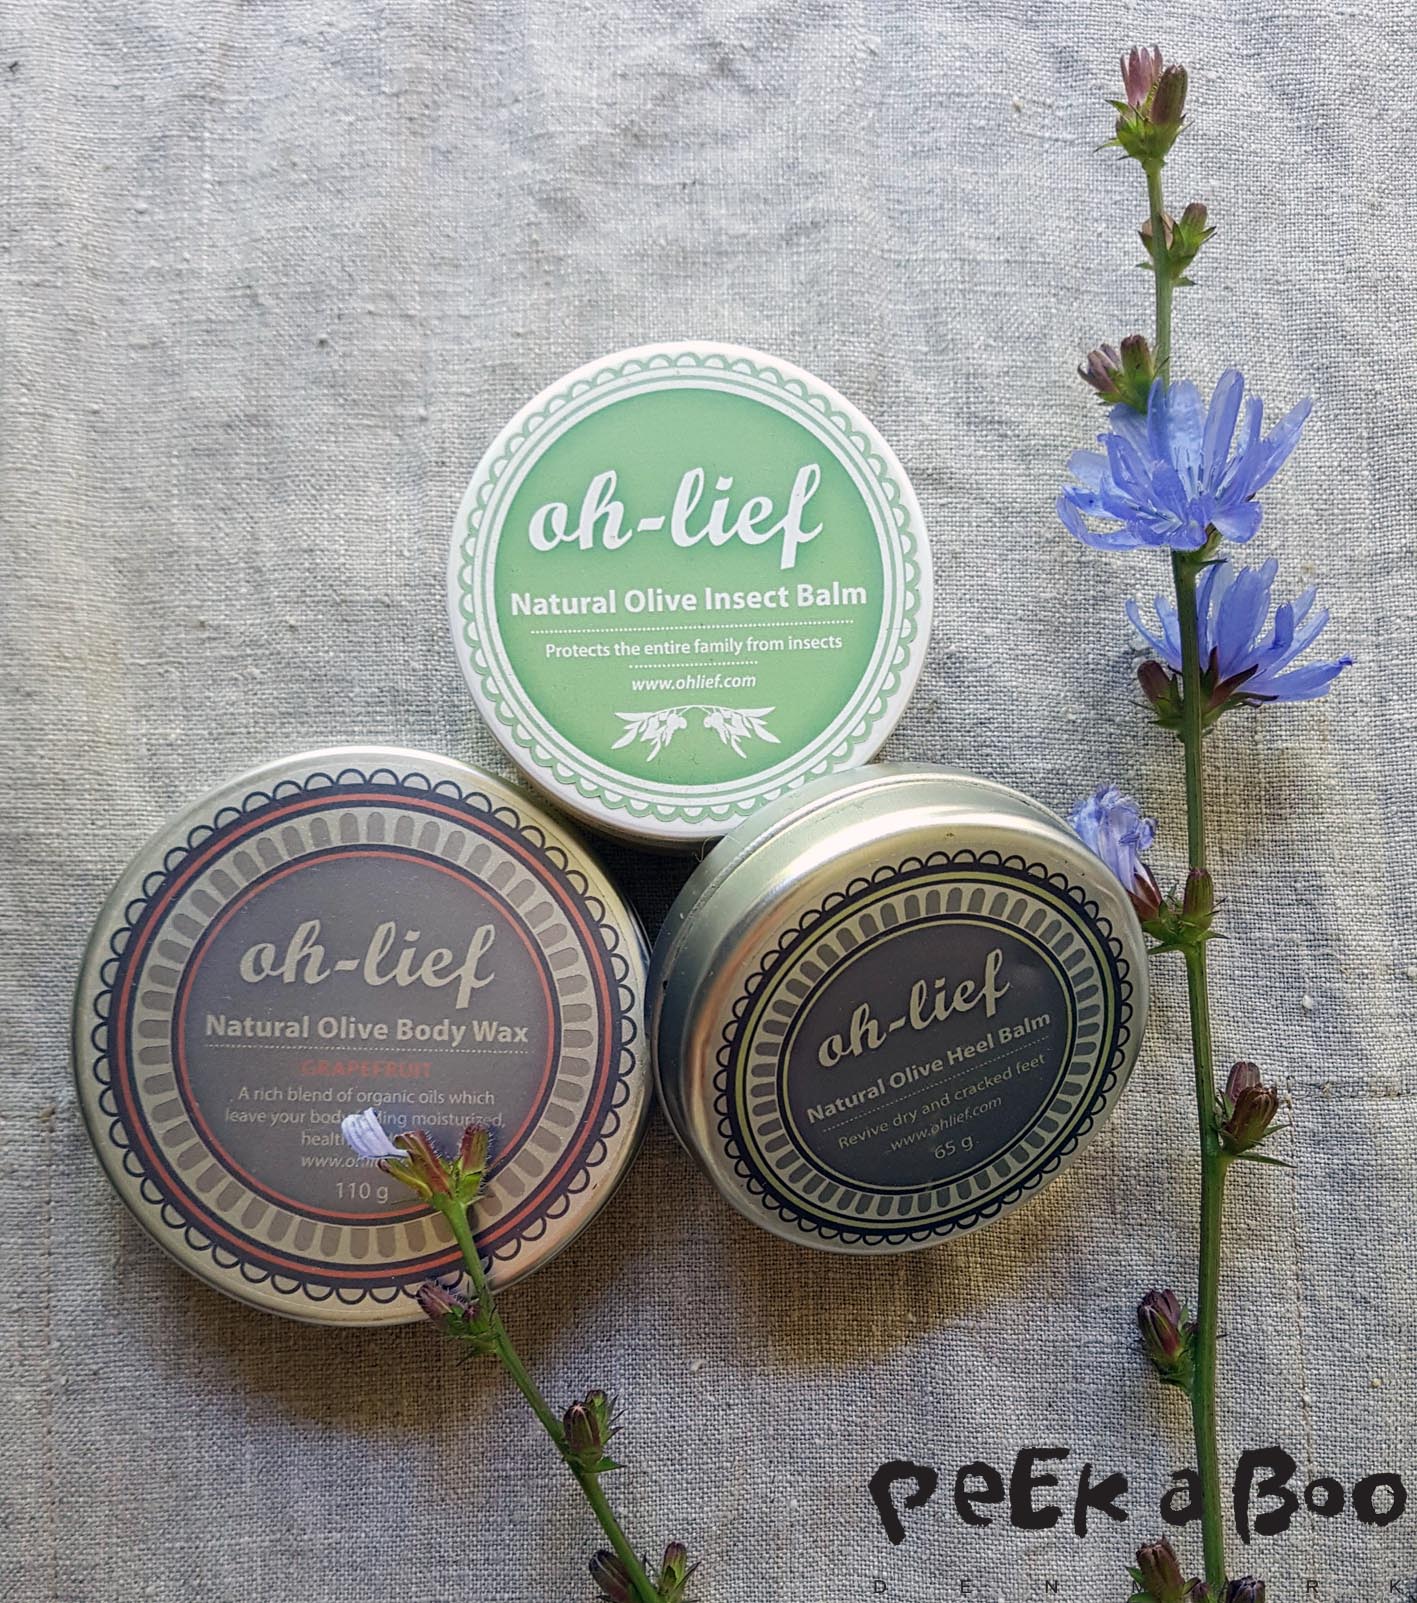 Oh lief body balm, heel balm and Anti insect balm.